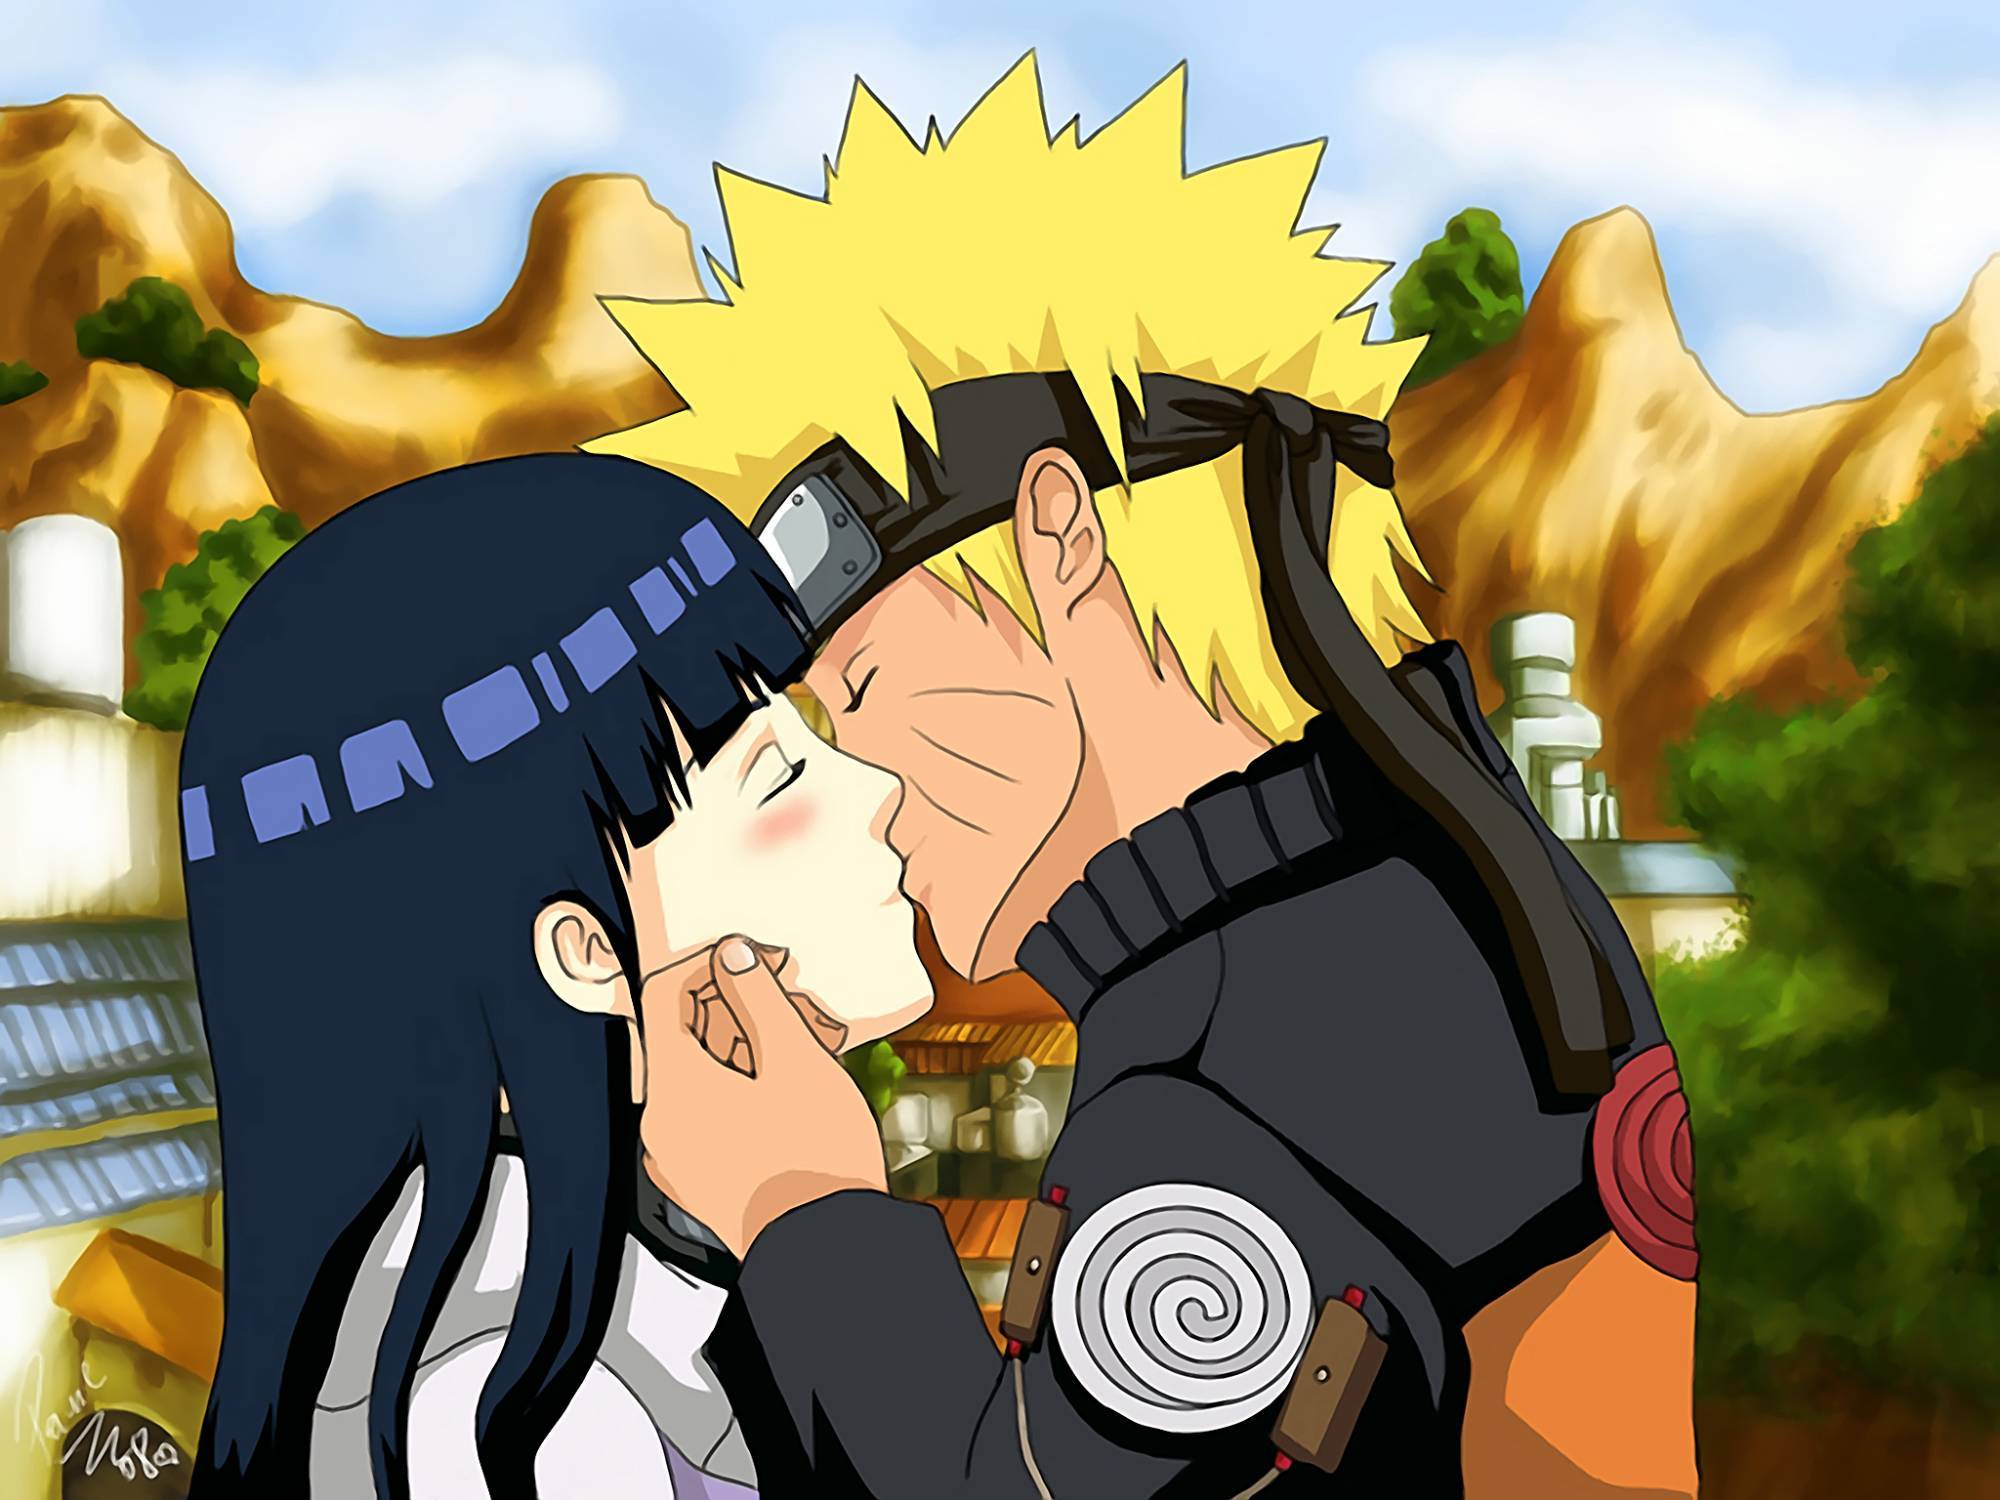 Stella2015 and Redwolf279 image Naruto kissing, love this pic